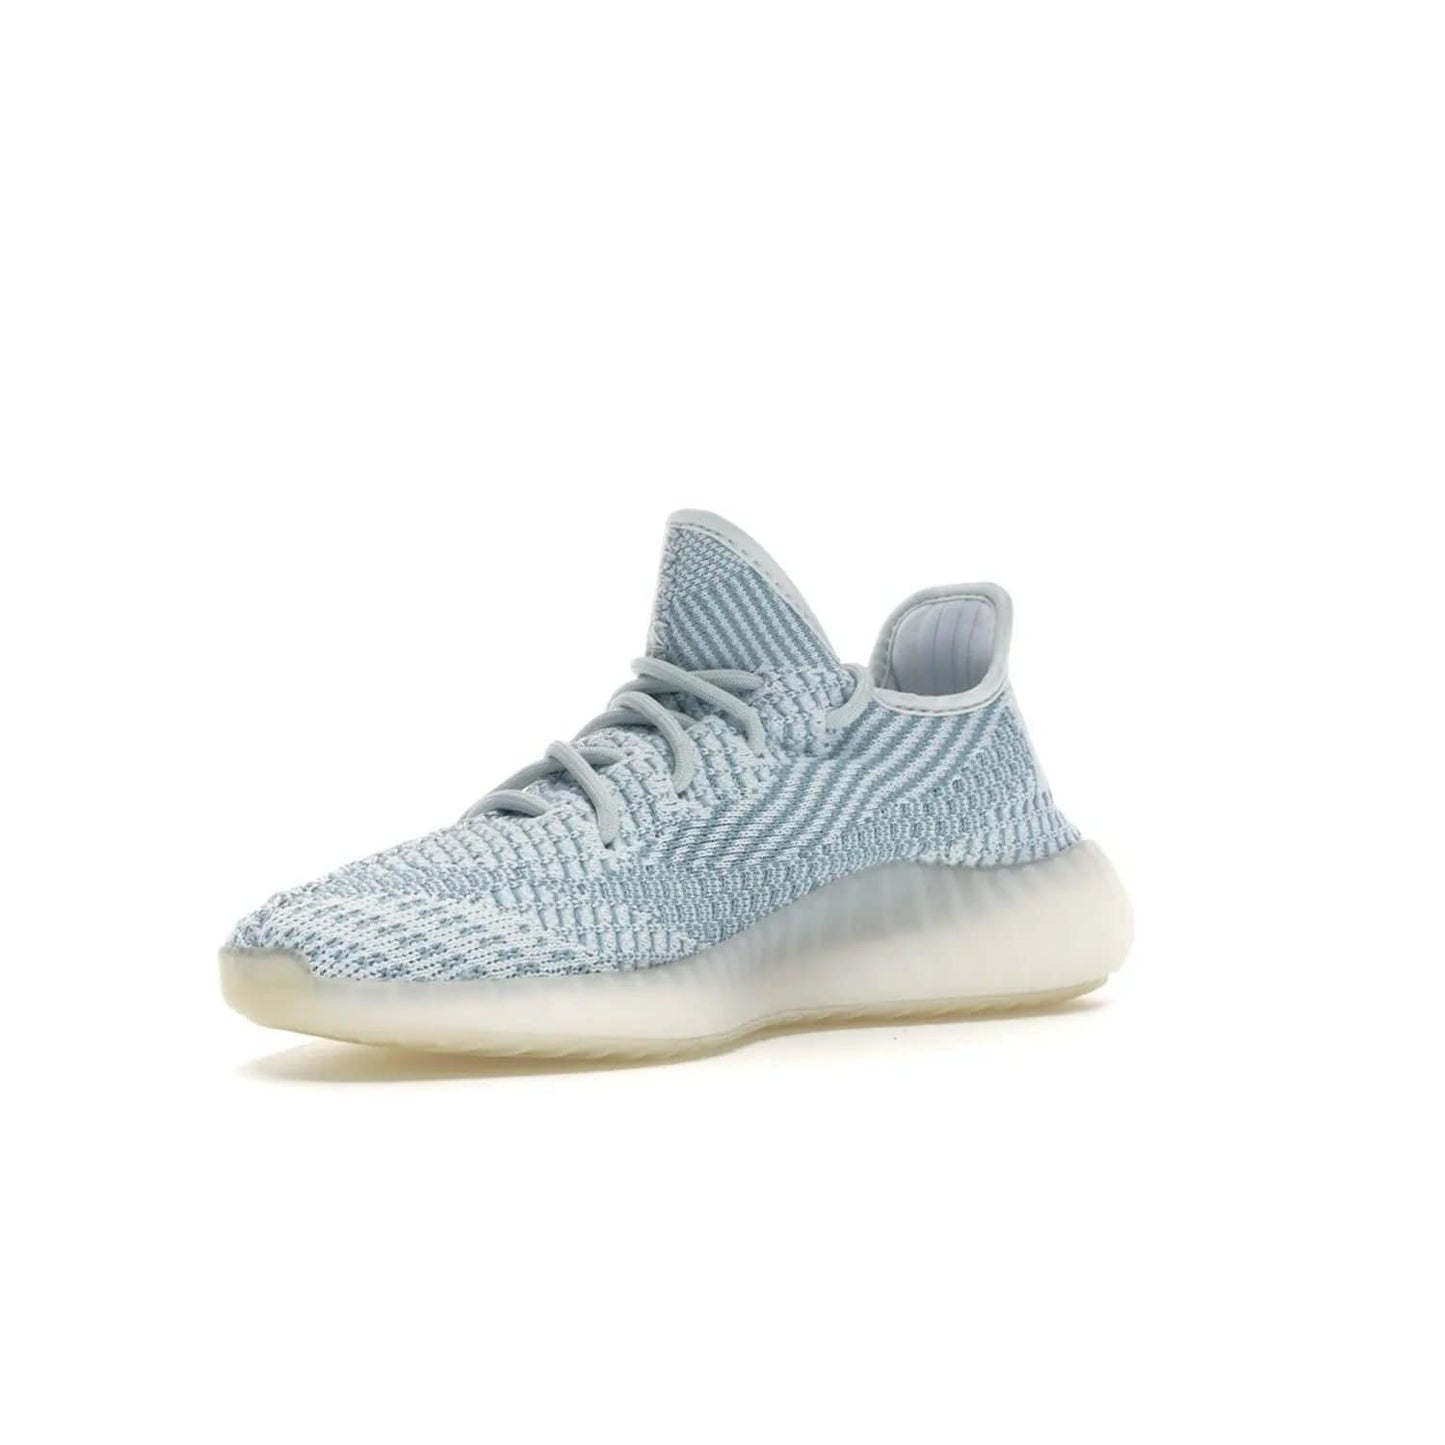 adidas Yeezy Boost 350 V2 Cloud White (Non-Reflective) - Image 15 - Only at www.BallersClubKickz.com - Adidas Yeezy Boost 350 V2 Cloud White (Non-Reflective) features Primeknit fabric and a unique, eye-catching design of cream, bluish-white, and transparent strip. Step out in timeless style with this eye-catching sneaker.